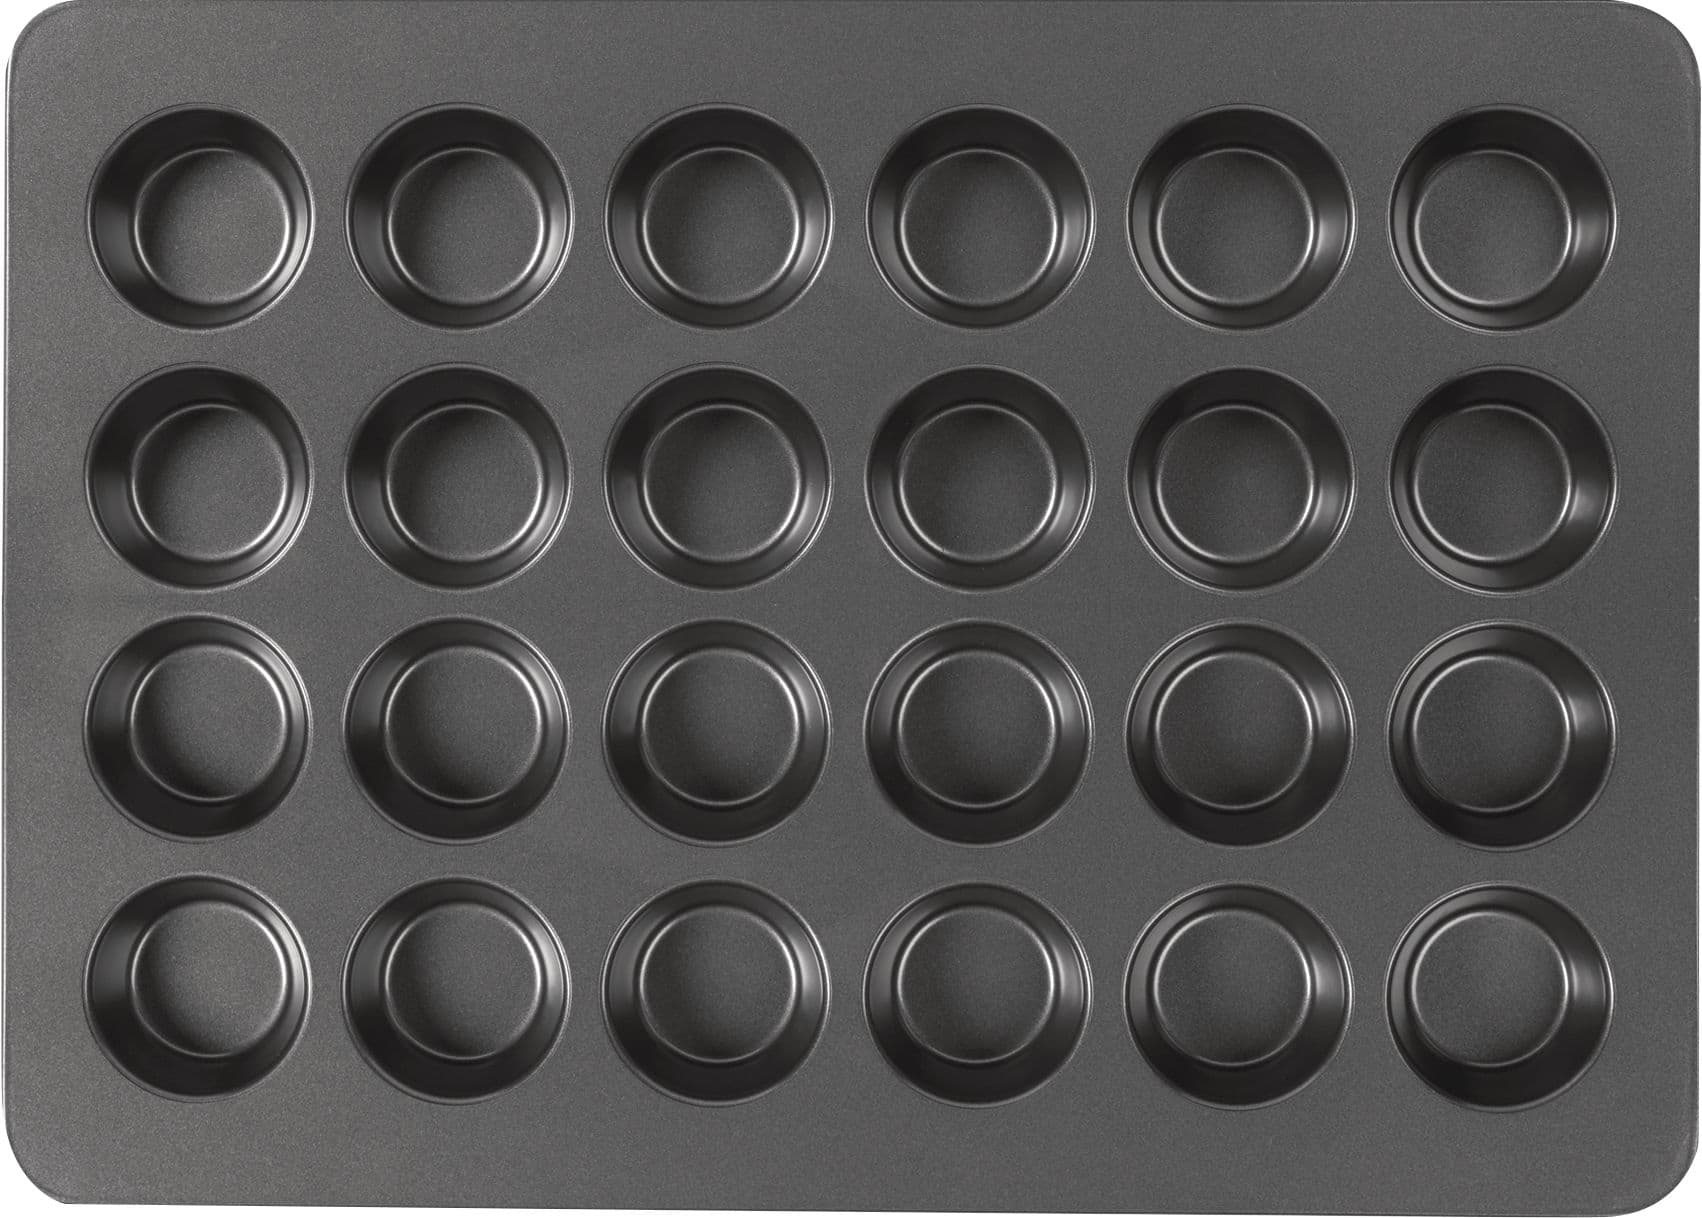 https://media-www.canadiantire.ca/product/living/kitchen/bakeware-baking-prep/1429066/wilton-mega-24-cup-muffin-pan-c2fdd619-0ecf-47b9-a6c8-5a32377f818a-jpgrendition.jpg